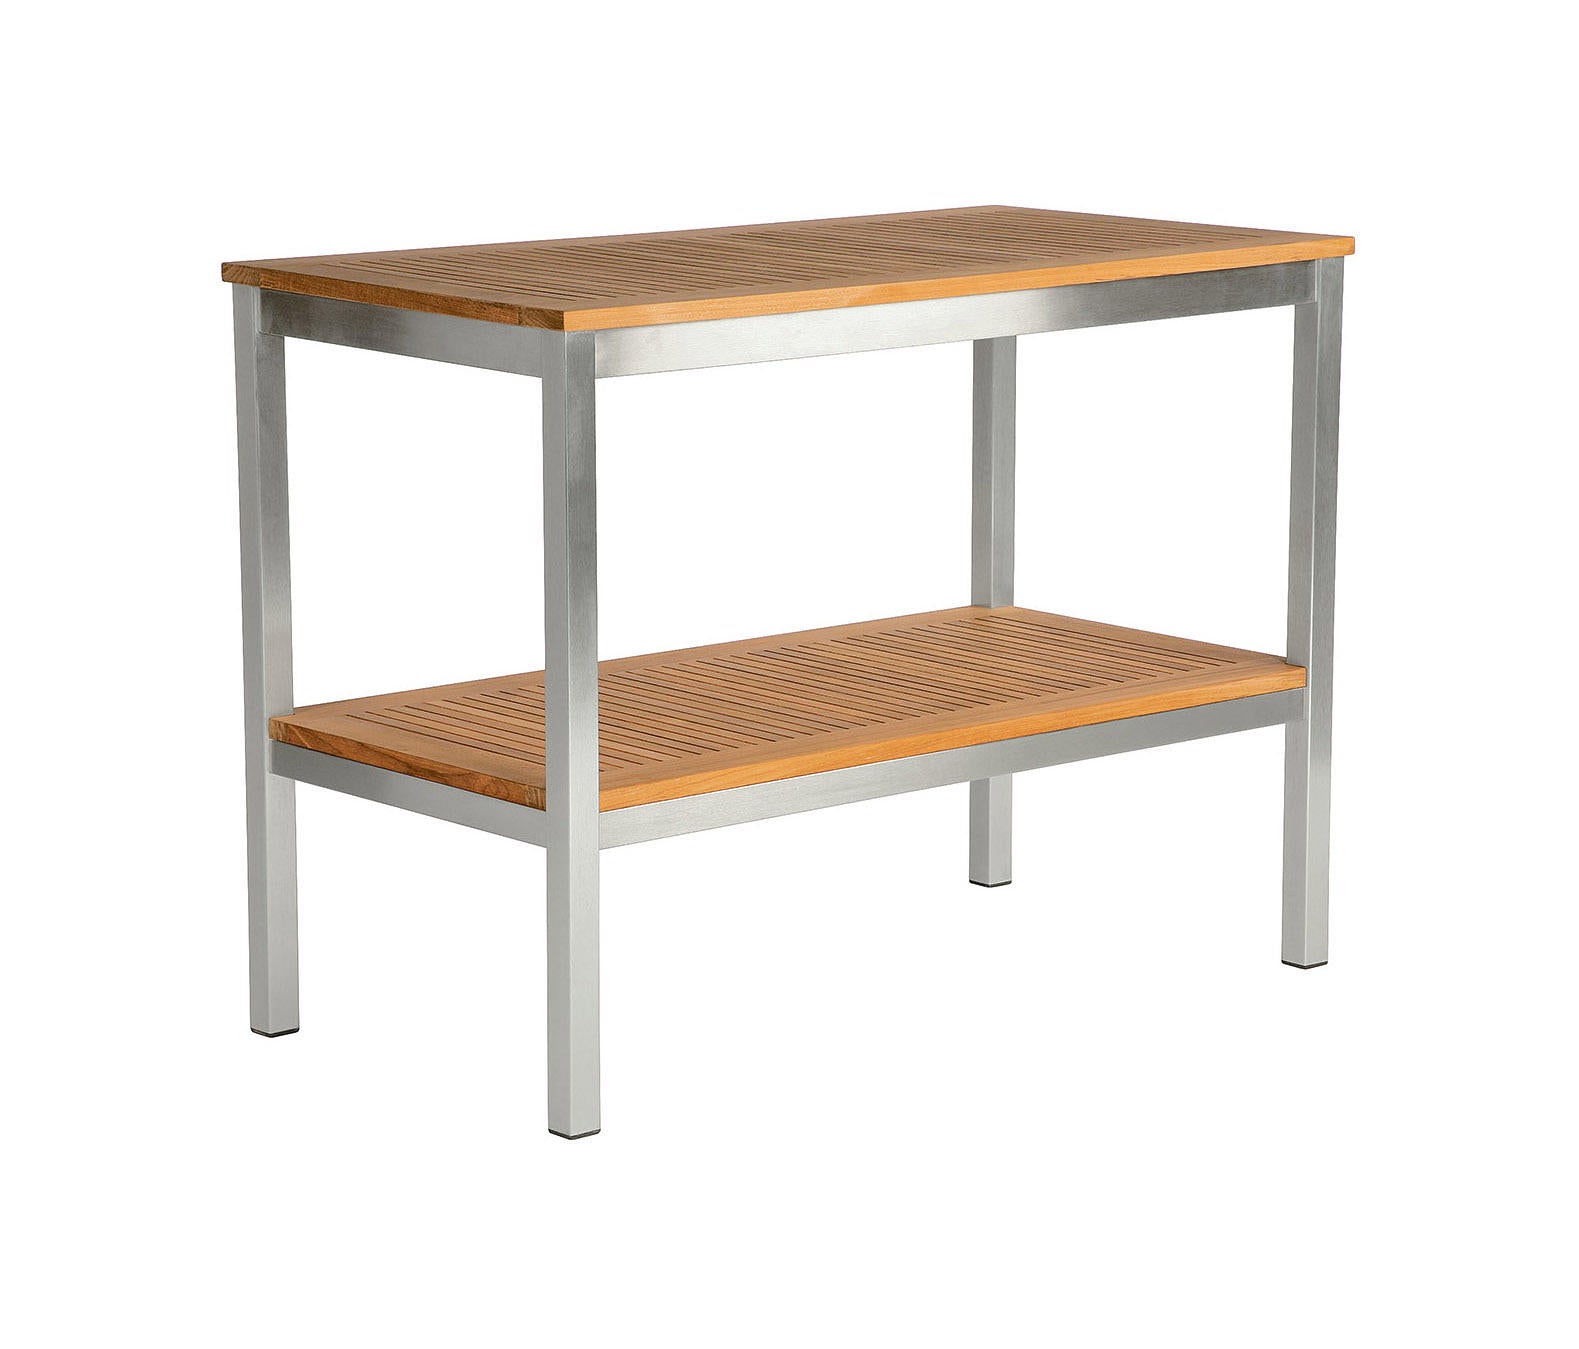 Equinox Dining Serving Table Rectangular With Teak Top And Shelf